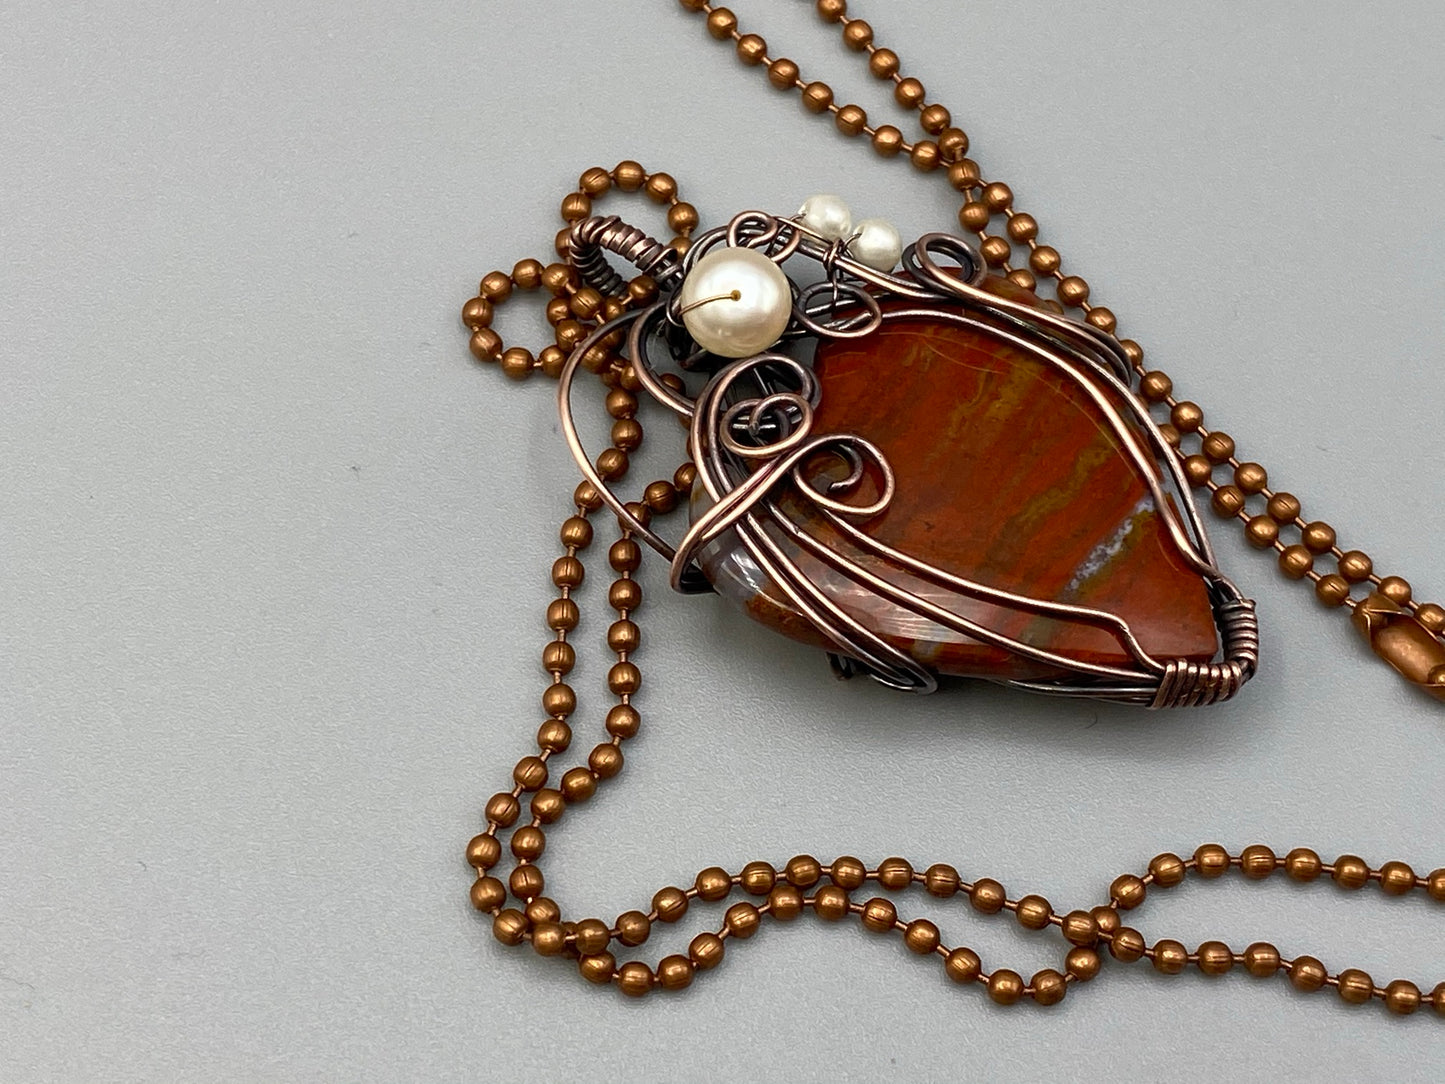 Heart Shaped Agate Pendant Wire Wrapped In Antique Copper